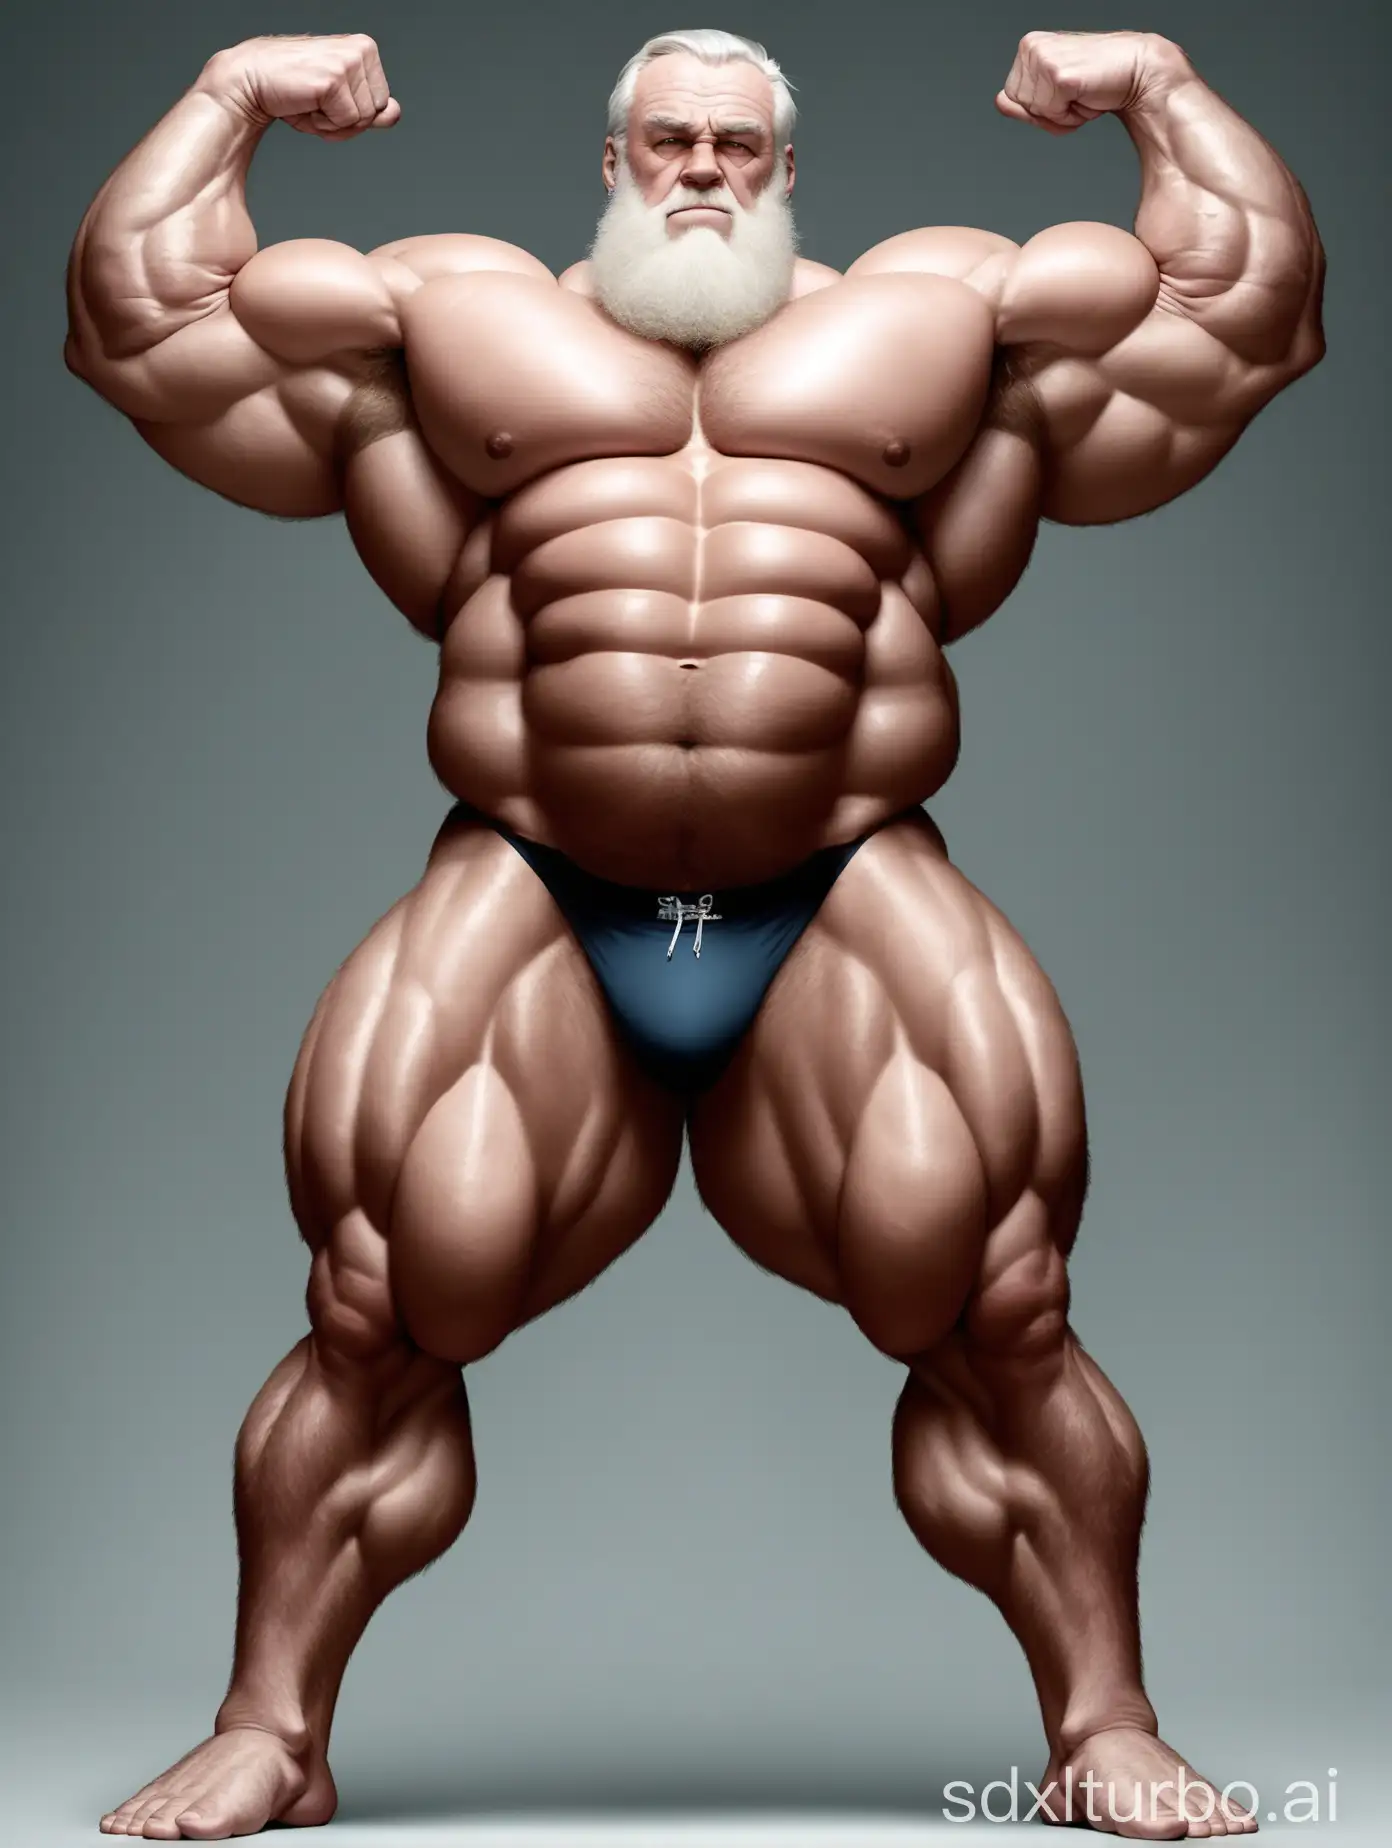 White skin and massive muscle stud, full bodyhair, Huge and giant and Strong body, Very strong legs, 2m tall, very Big Chest, very Big biceps, very 8-pack abs, Very Massive muscle Body, Wearing underwear, he is giant tall, very fat, very fat, Full Body, very long strong legs, raise his arms to show his huge biceps, raise his arms to show his huge biceps, very old man, very handsome men,